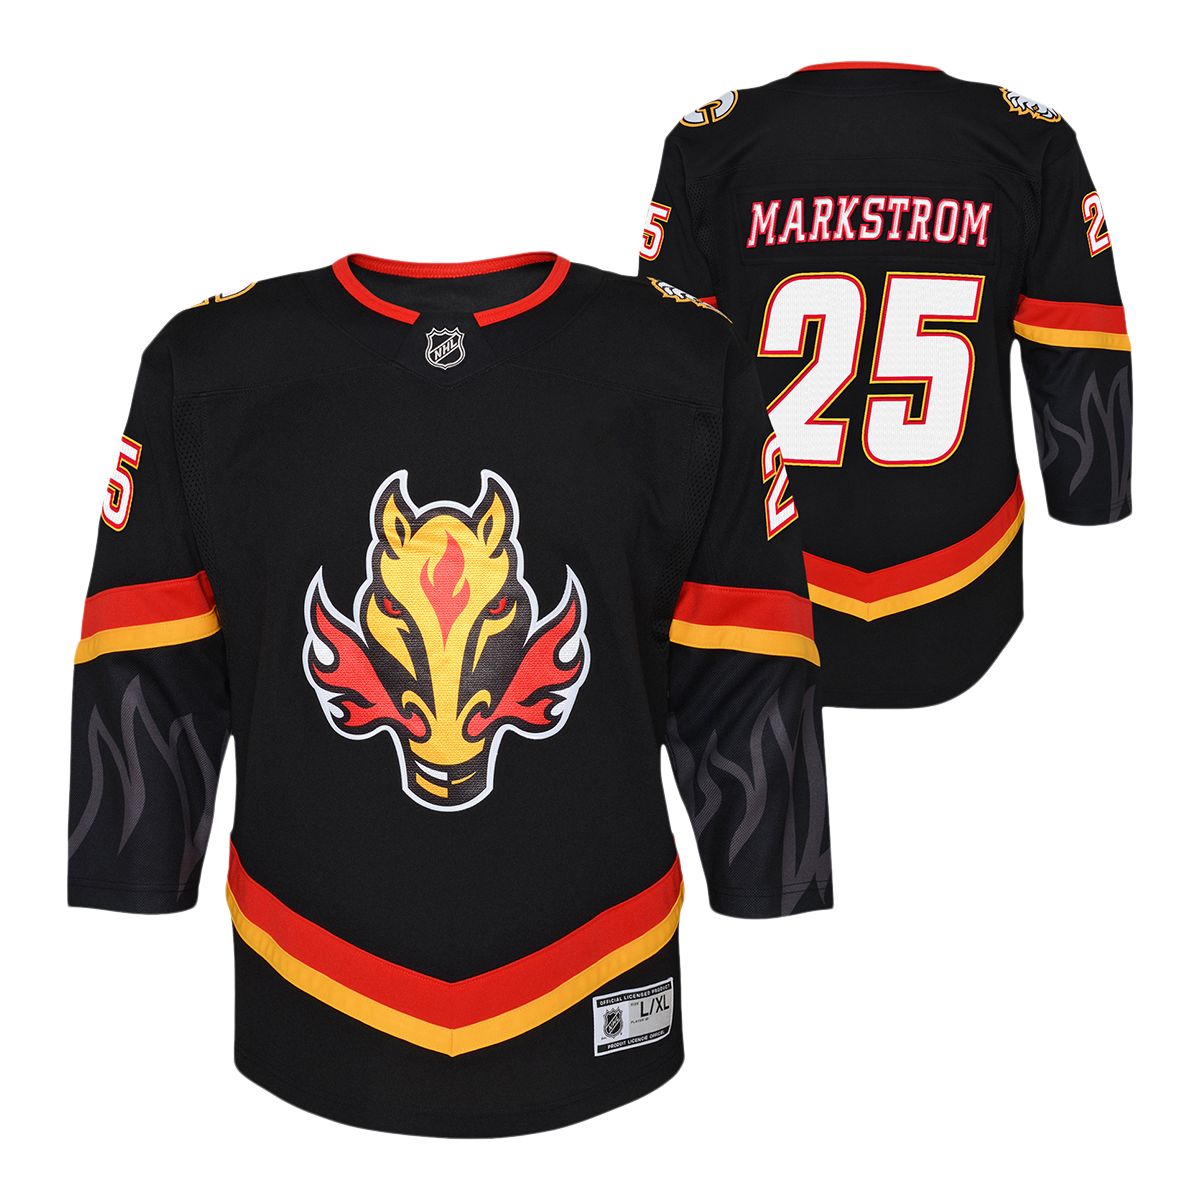 Calgary Flames Replica Home Jersey - Youth